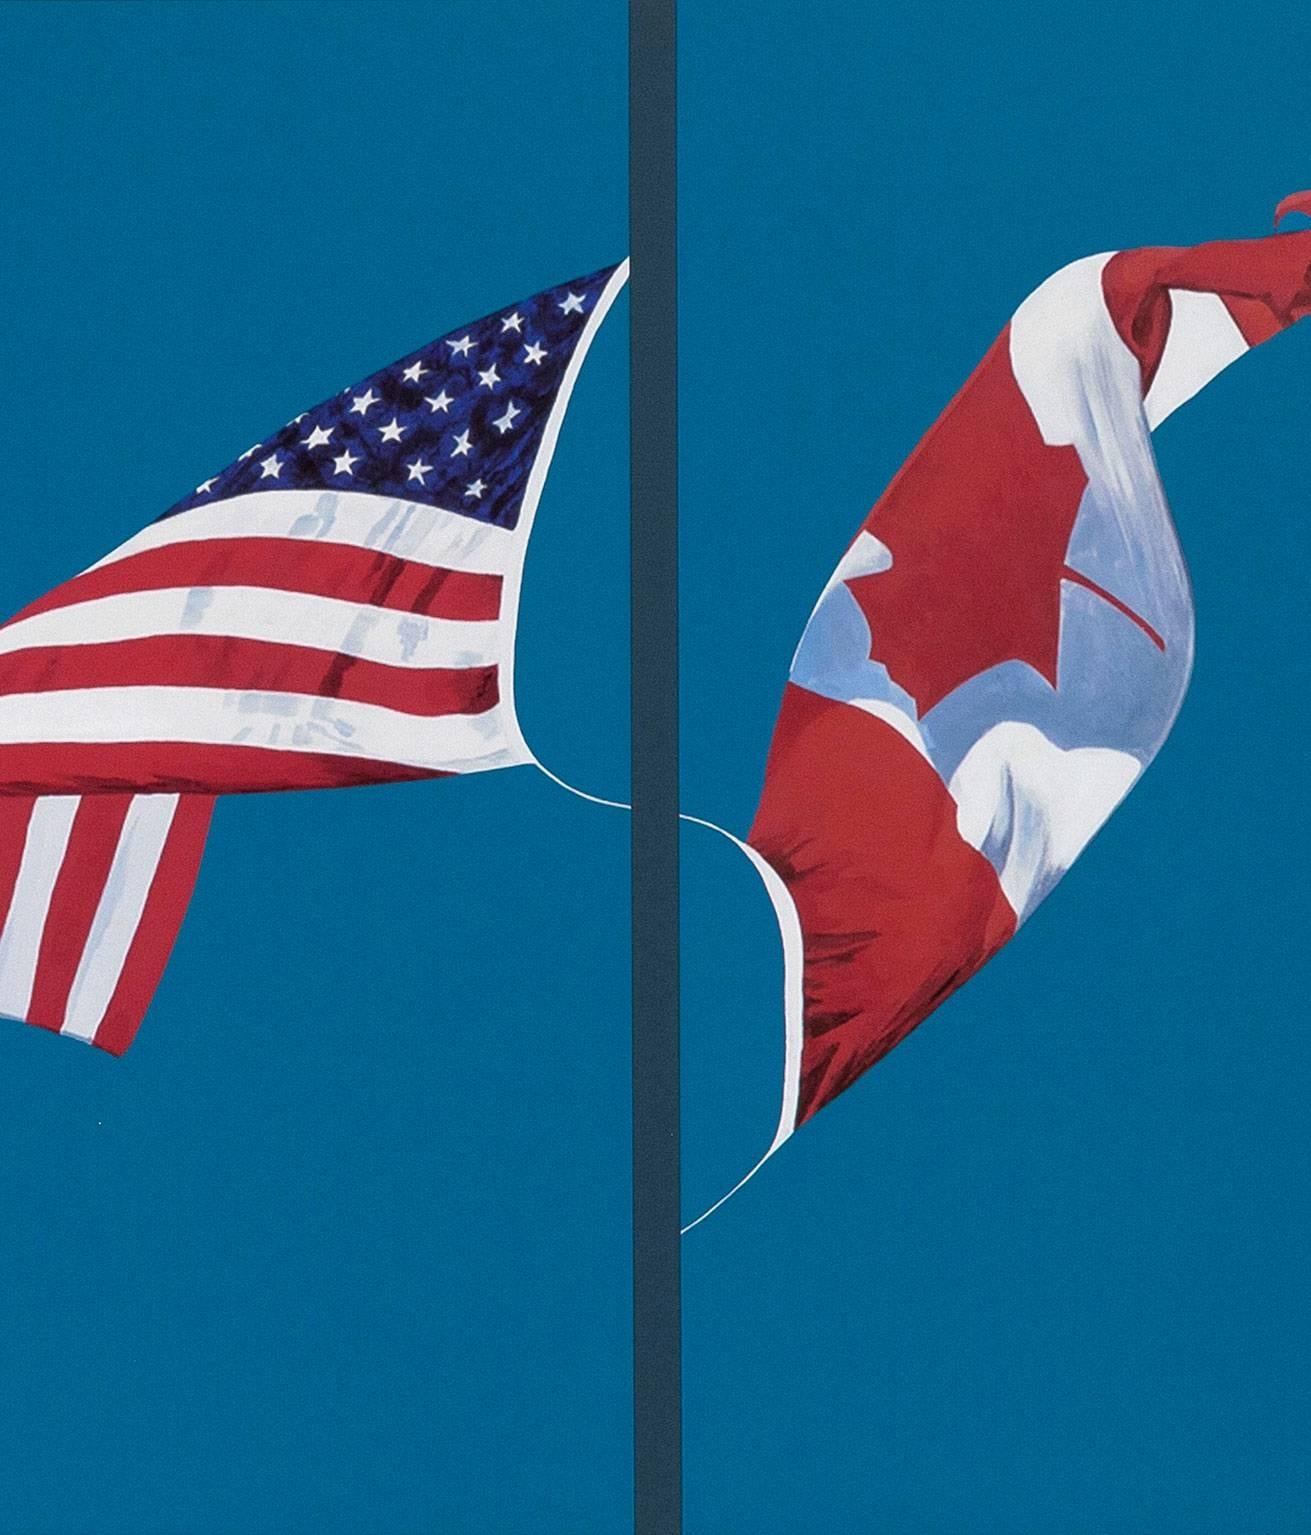 Charles Pachter Figurative Print - Side By Side